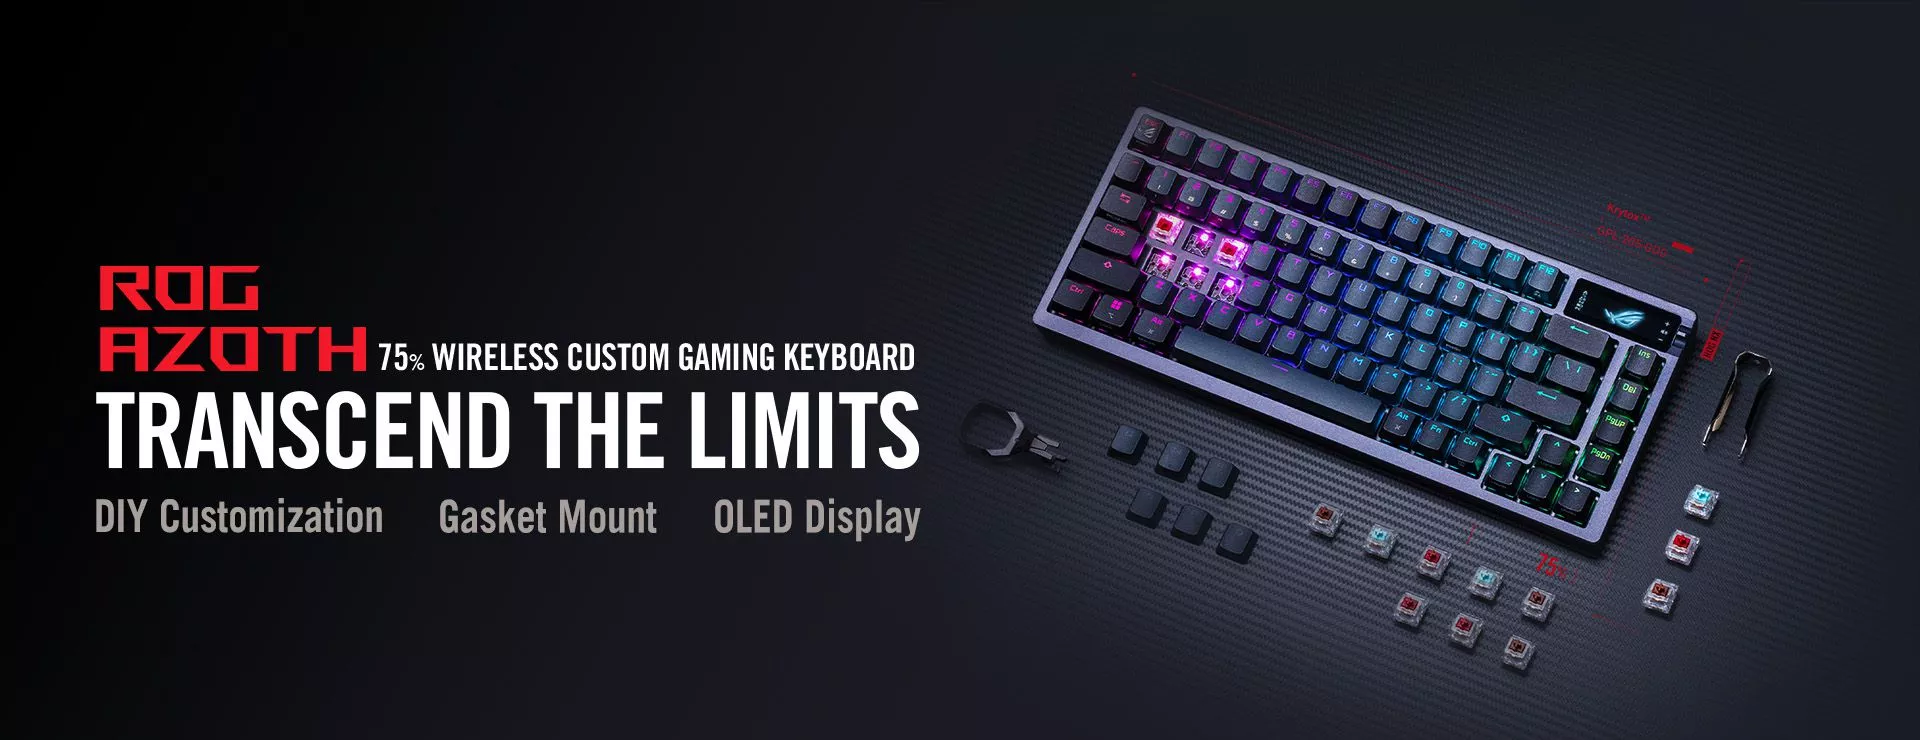 Picture of ROG Azoth 75% Wireless custom Gaming Keyboard with swappable key caps